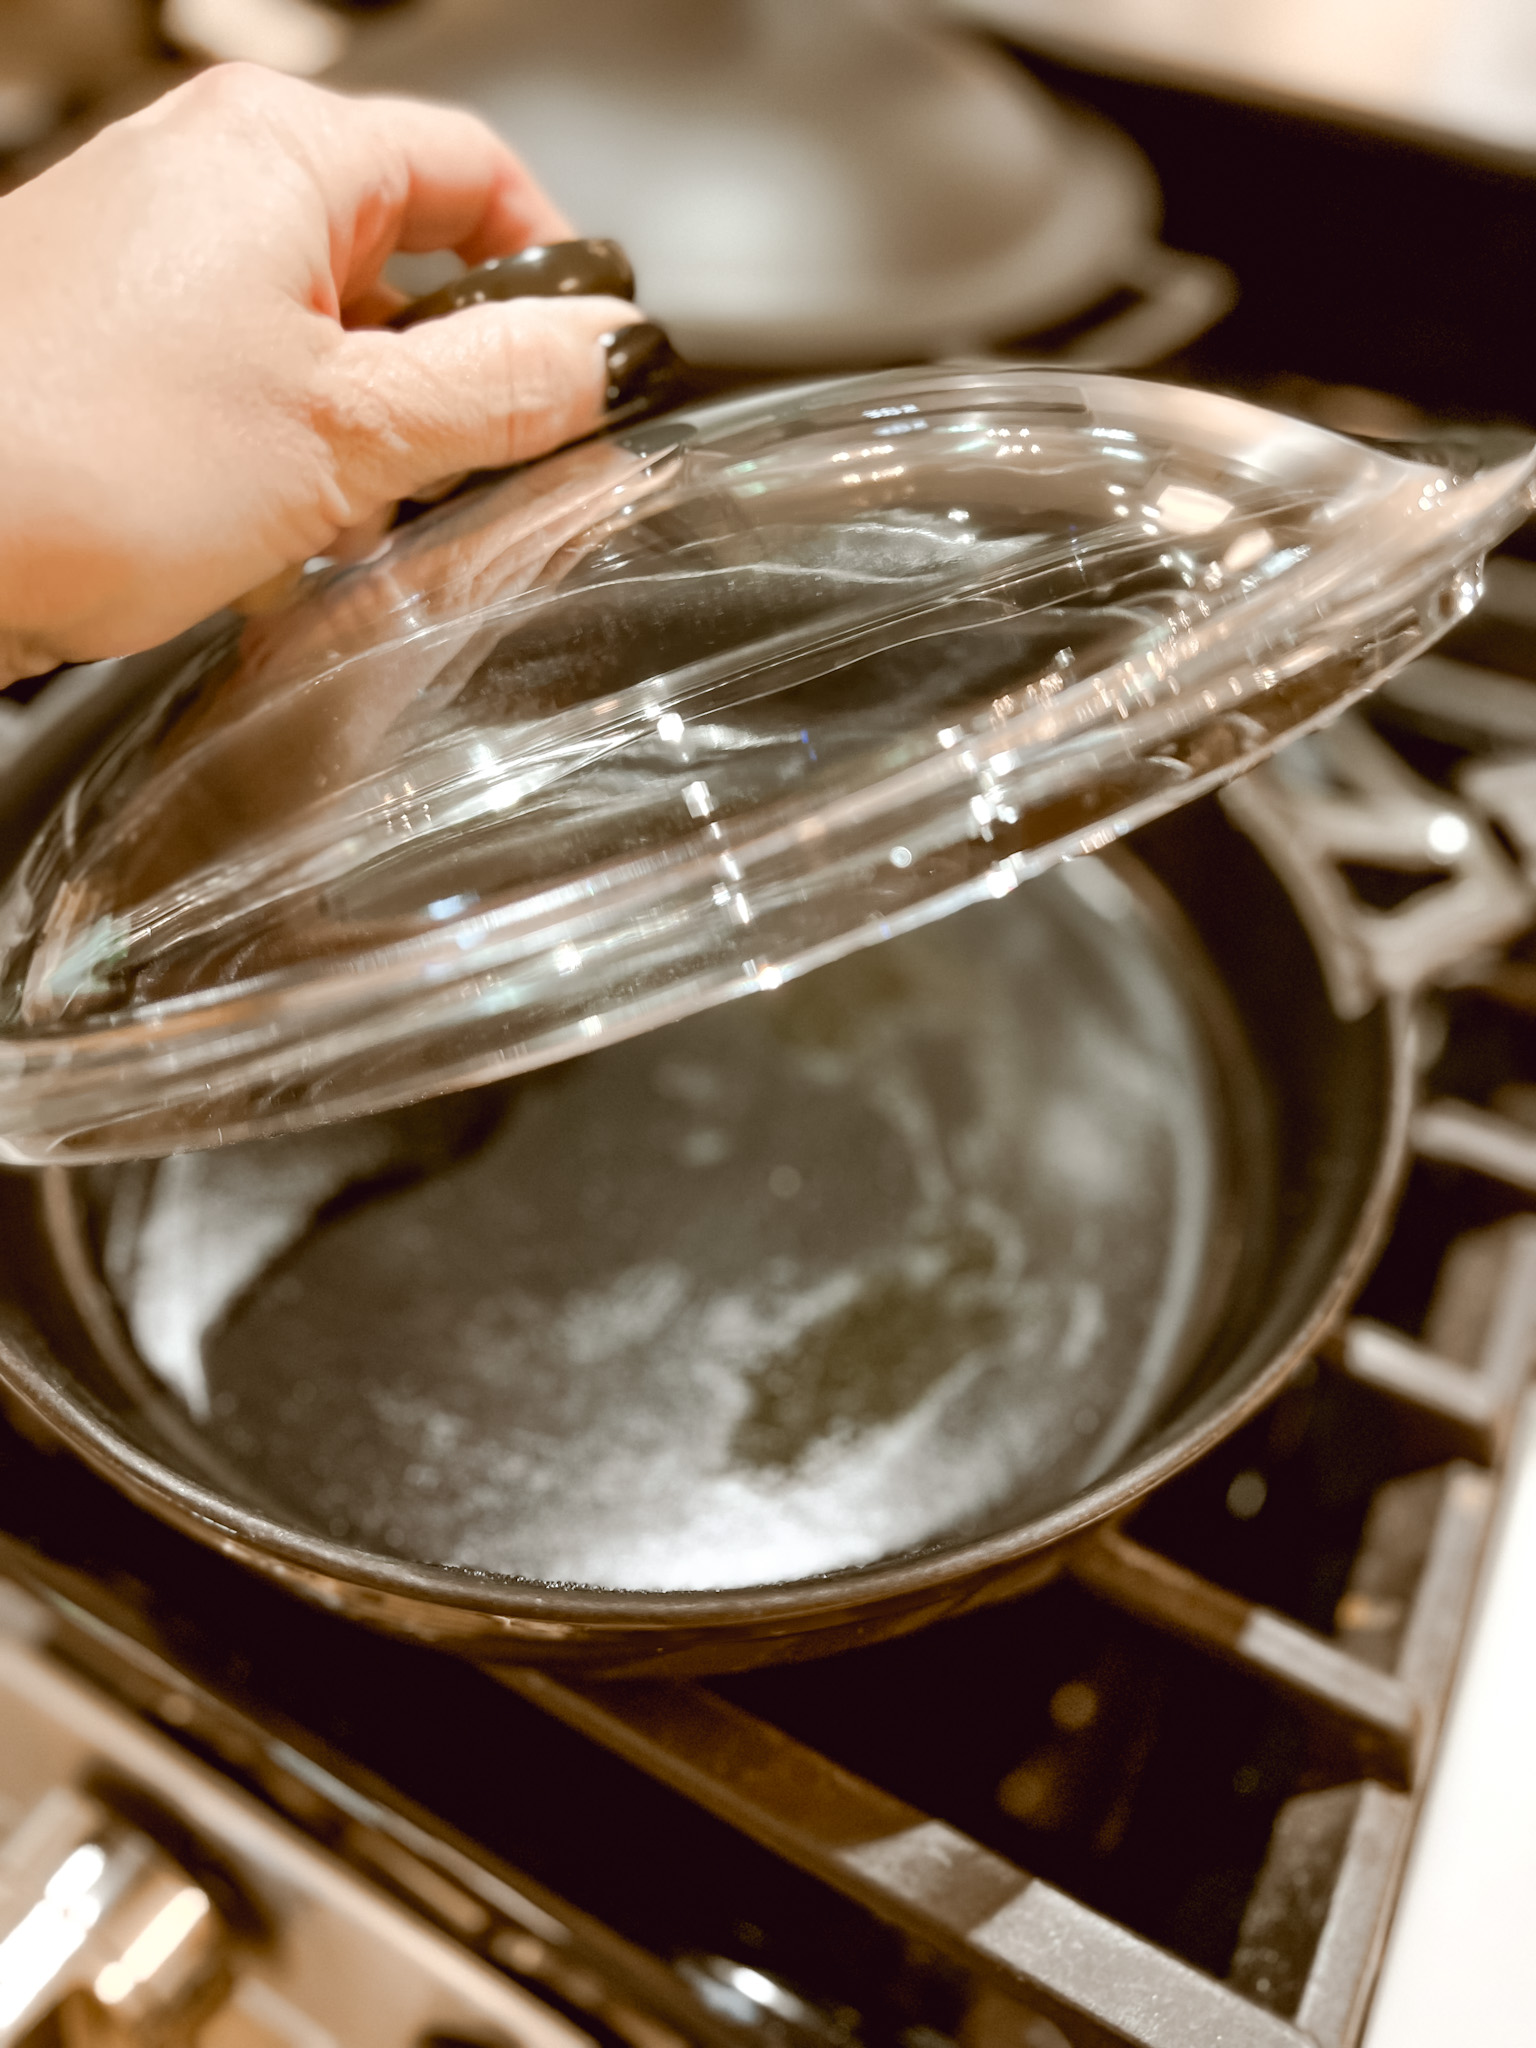 Our Favorite Cookware - Deb and Danelle